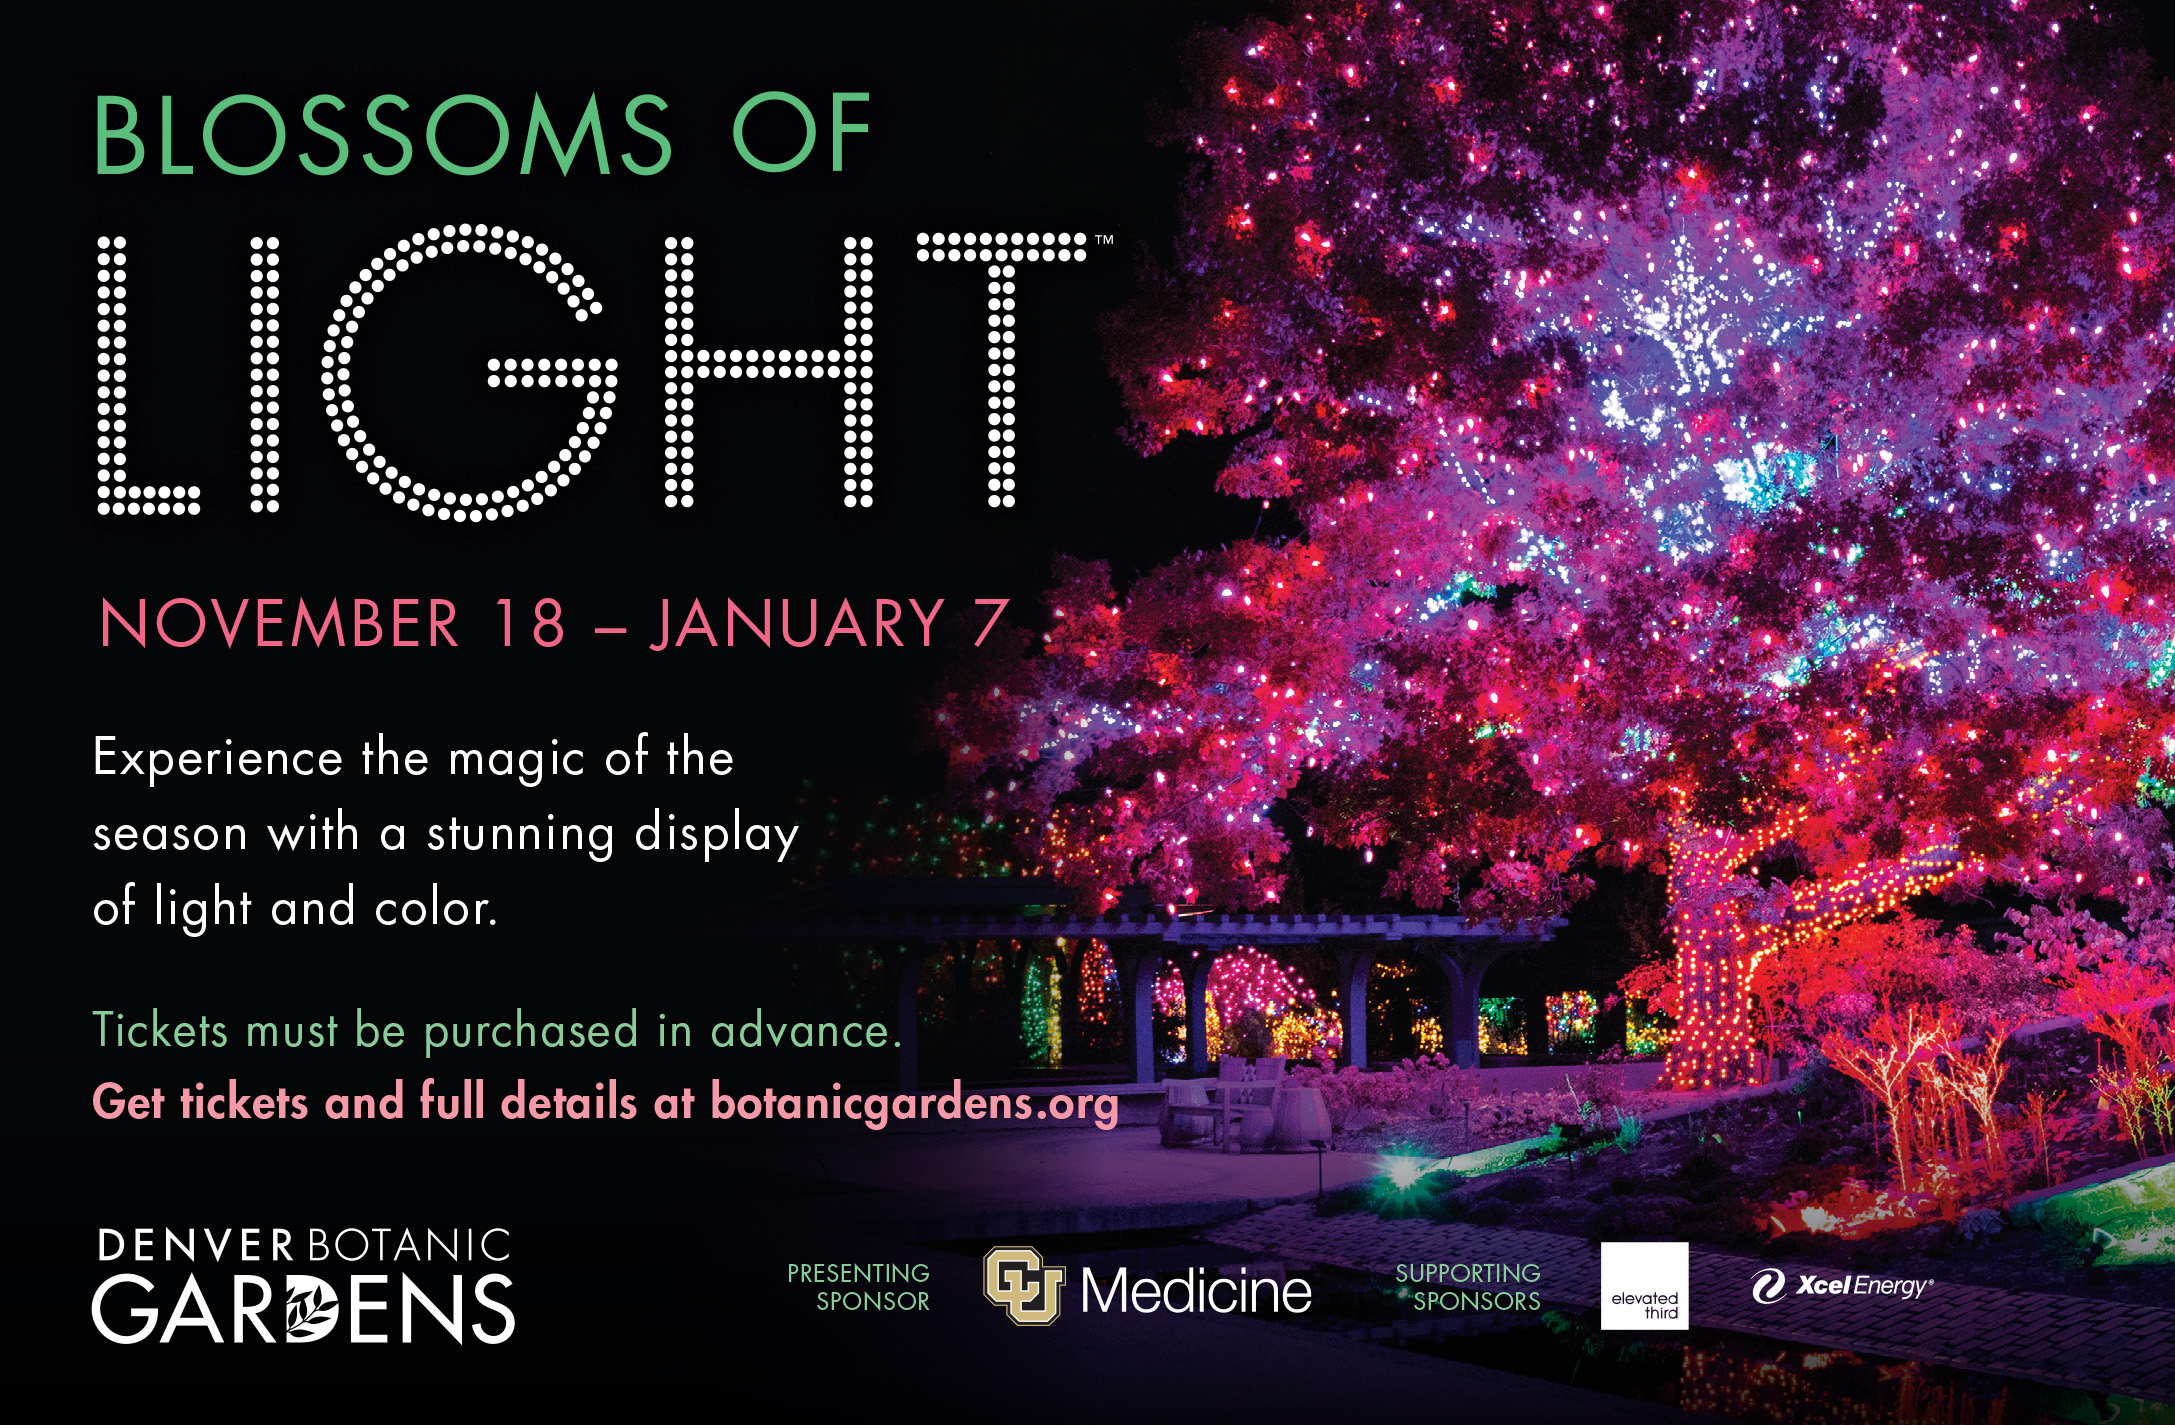 Take a Stroll with Us at the Denver Botanic Gardens for Blossoms of Light